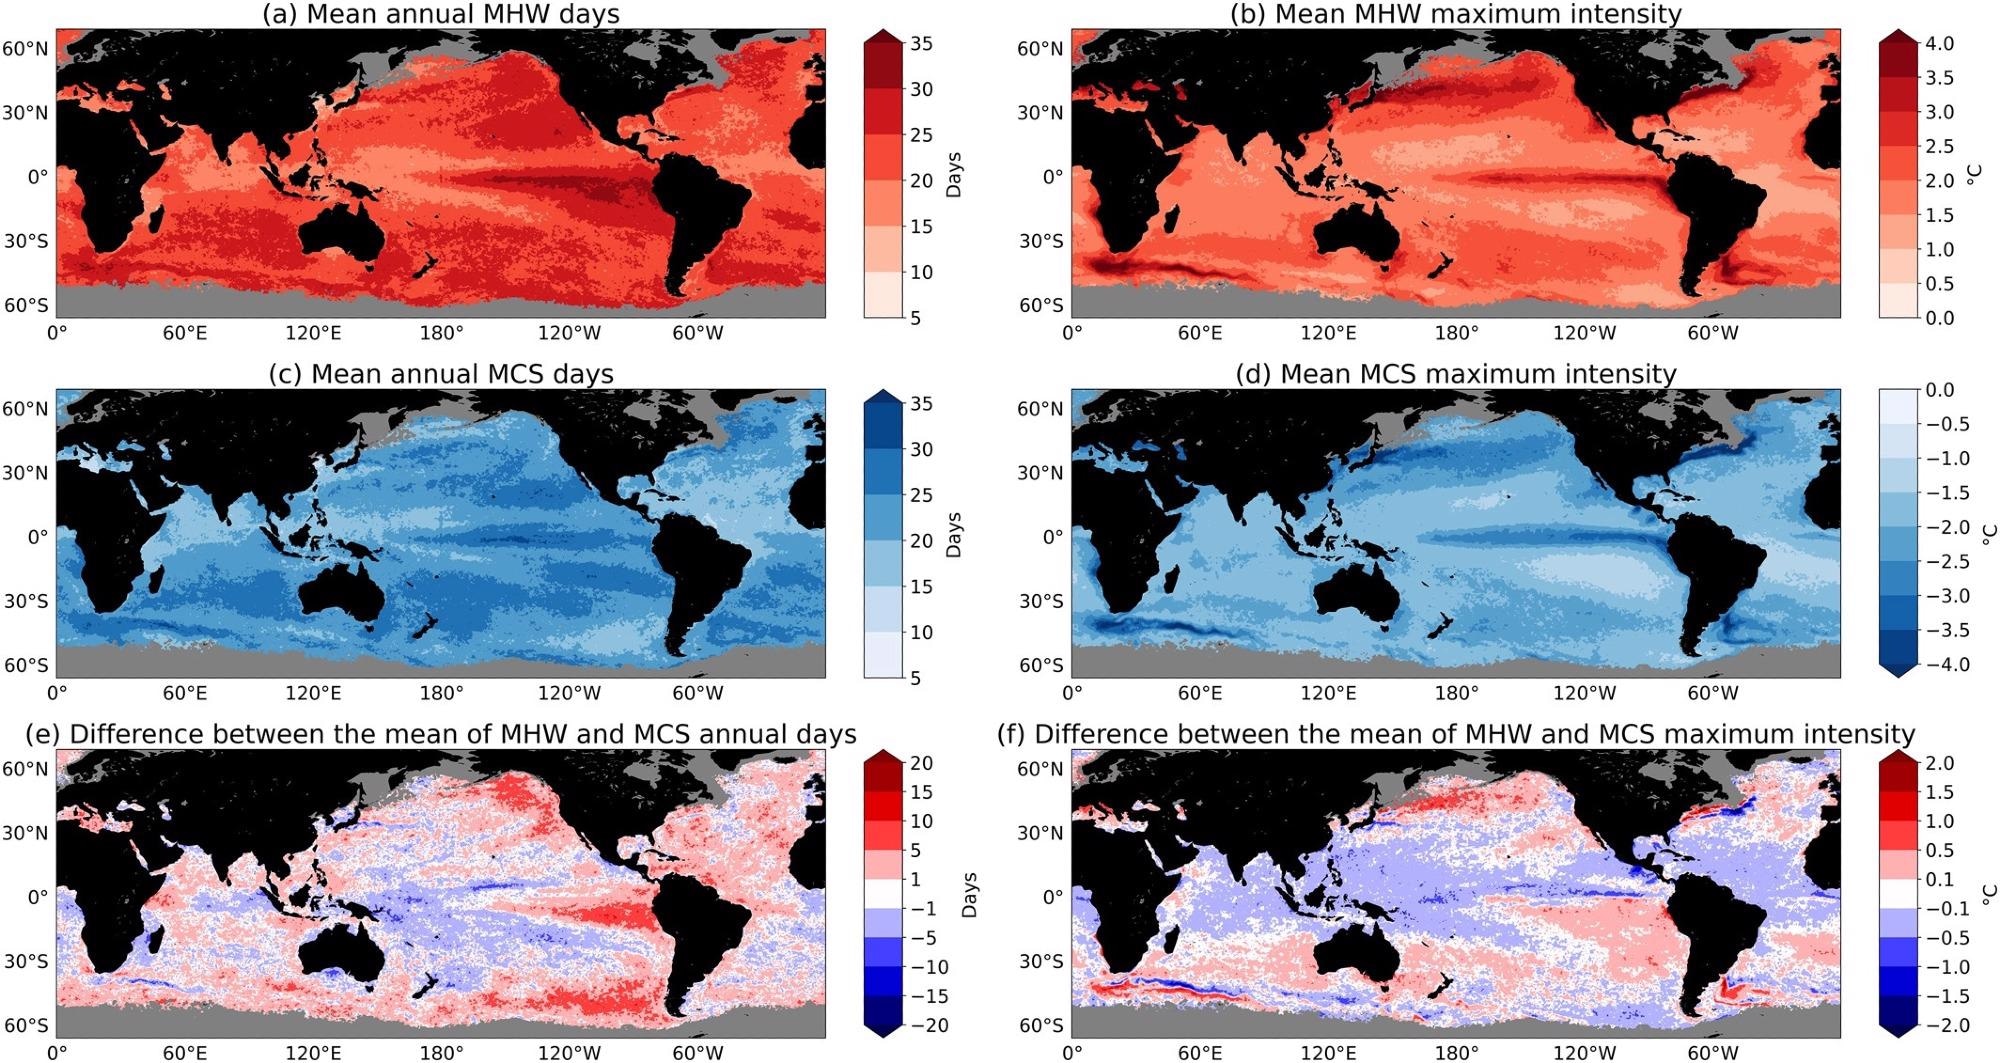 Mean of the marine heatwave (MHW) and marine cold-spells (MCS) annual days and maximum intensity, and the spatial pattern difference between these metrics globally in National Oceanic and Atmospheric Administration Optimum Interpolation sea surface temperature over 1982–2020. Shown are the global pattern of (a) mean annual MHW days, (b) mean MHW maximum intensity, (c) mean annual MCS days, (d) mean MCS maximum intensity, (e) the difference between mean annual MHW days and mean annual MCS days (i.e., (a) mean annual MHW days minus (c) mean annual MCS days), and (f) the difference between the mean MHW maximum intensity and mean MCS maximum intensity (i.e., (b) mean MHW maximum intensity plus (d) mean MCS maximum intensity). For the difference subplots (i.e., (e), (f)), positive values (red regions) represent the annual MHW days as being greater than annual MCS days, MHW maximum intensities are more intense than MCS maximum intensities. Conversely, negative values (blue regions) represent the annual MCS days as being larger than annual MHW days, MCS maximum intensities are more intense than MHW maximum intensities.